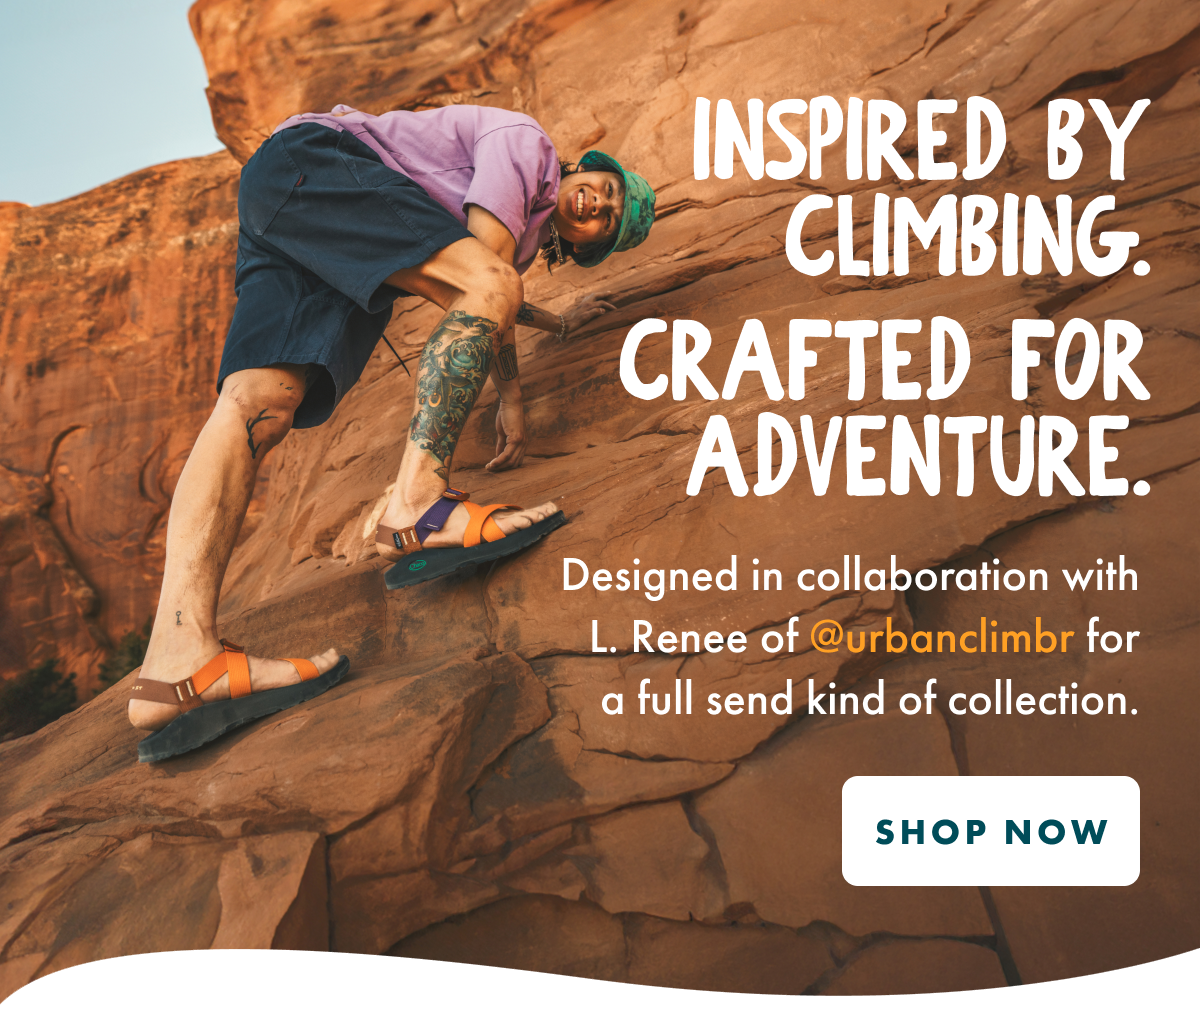 INSPIRED BY CLIMBING. CRAFTED FOR ADVENTURE. Designed in collaboration with L. Renee of @urbanclimbr for a full send kind of collection. SHOP NOW